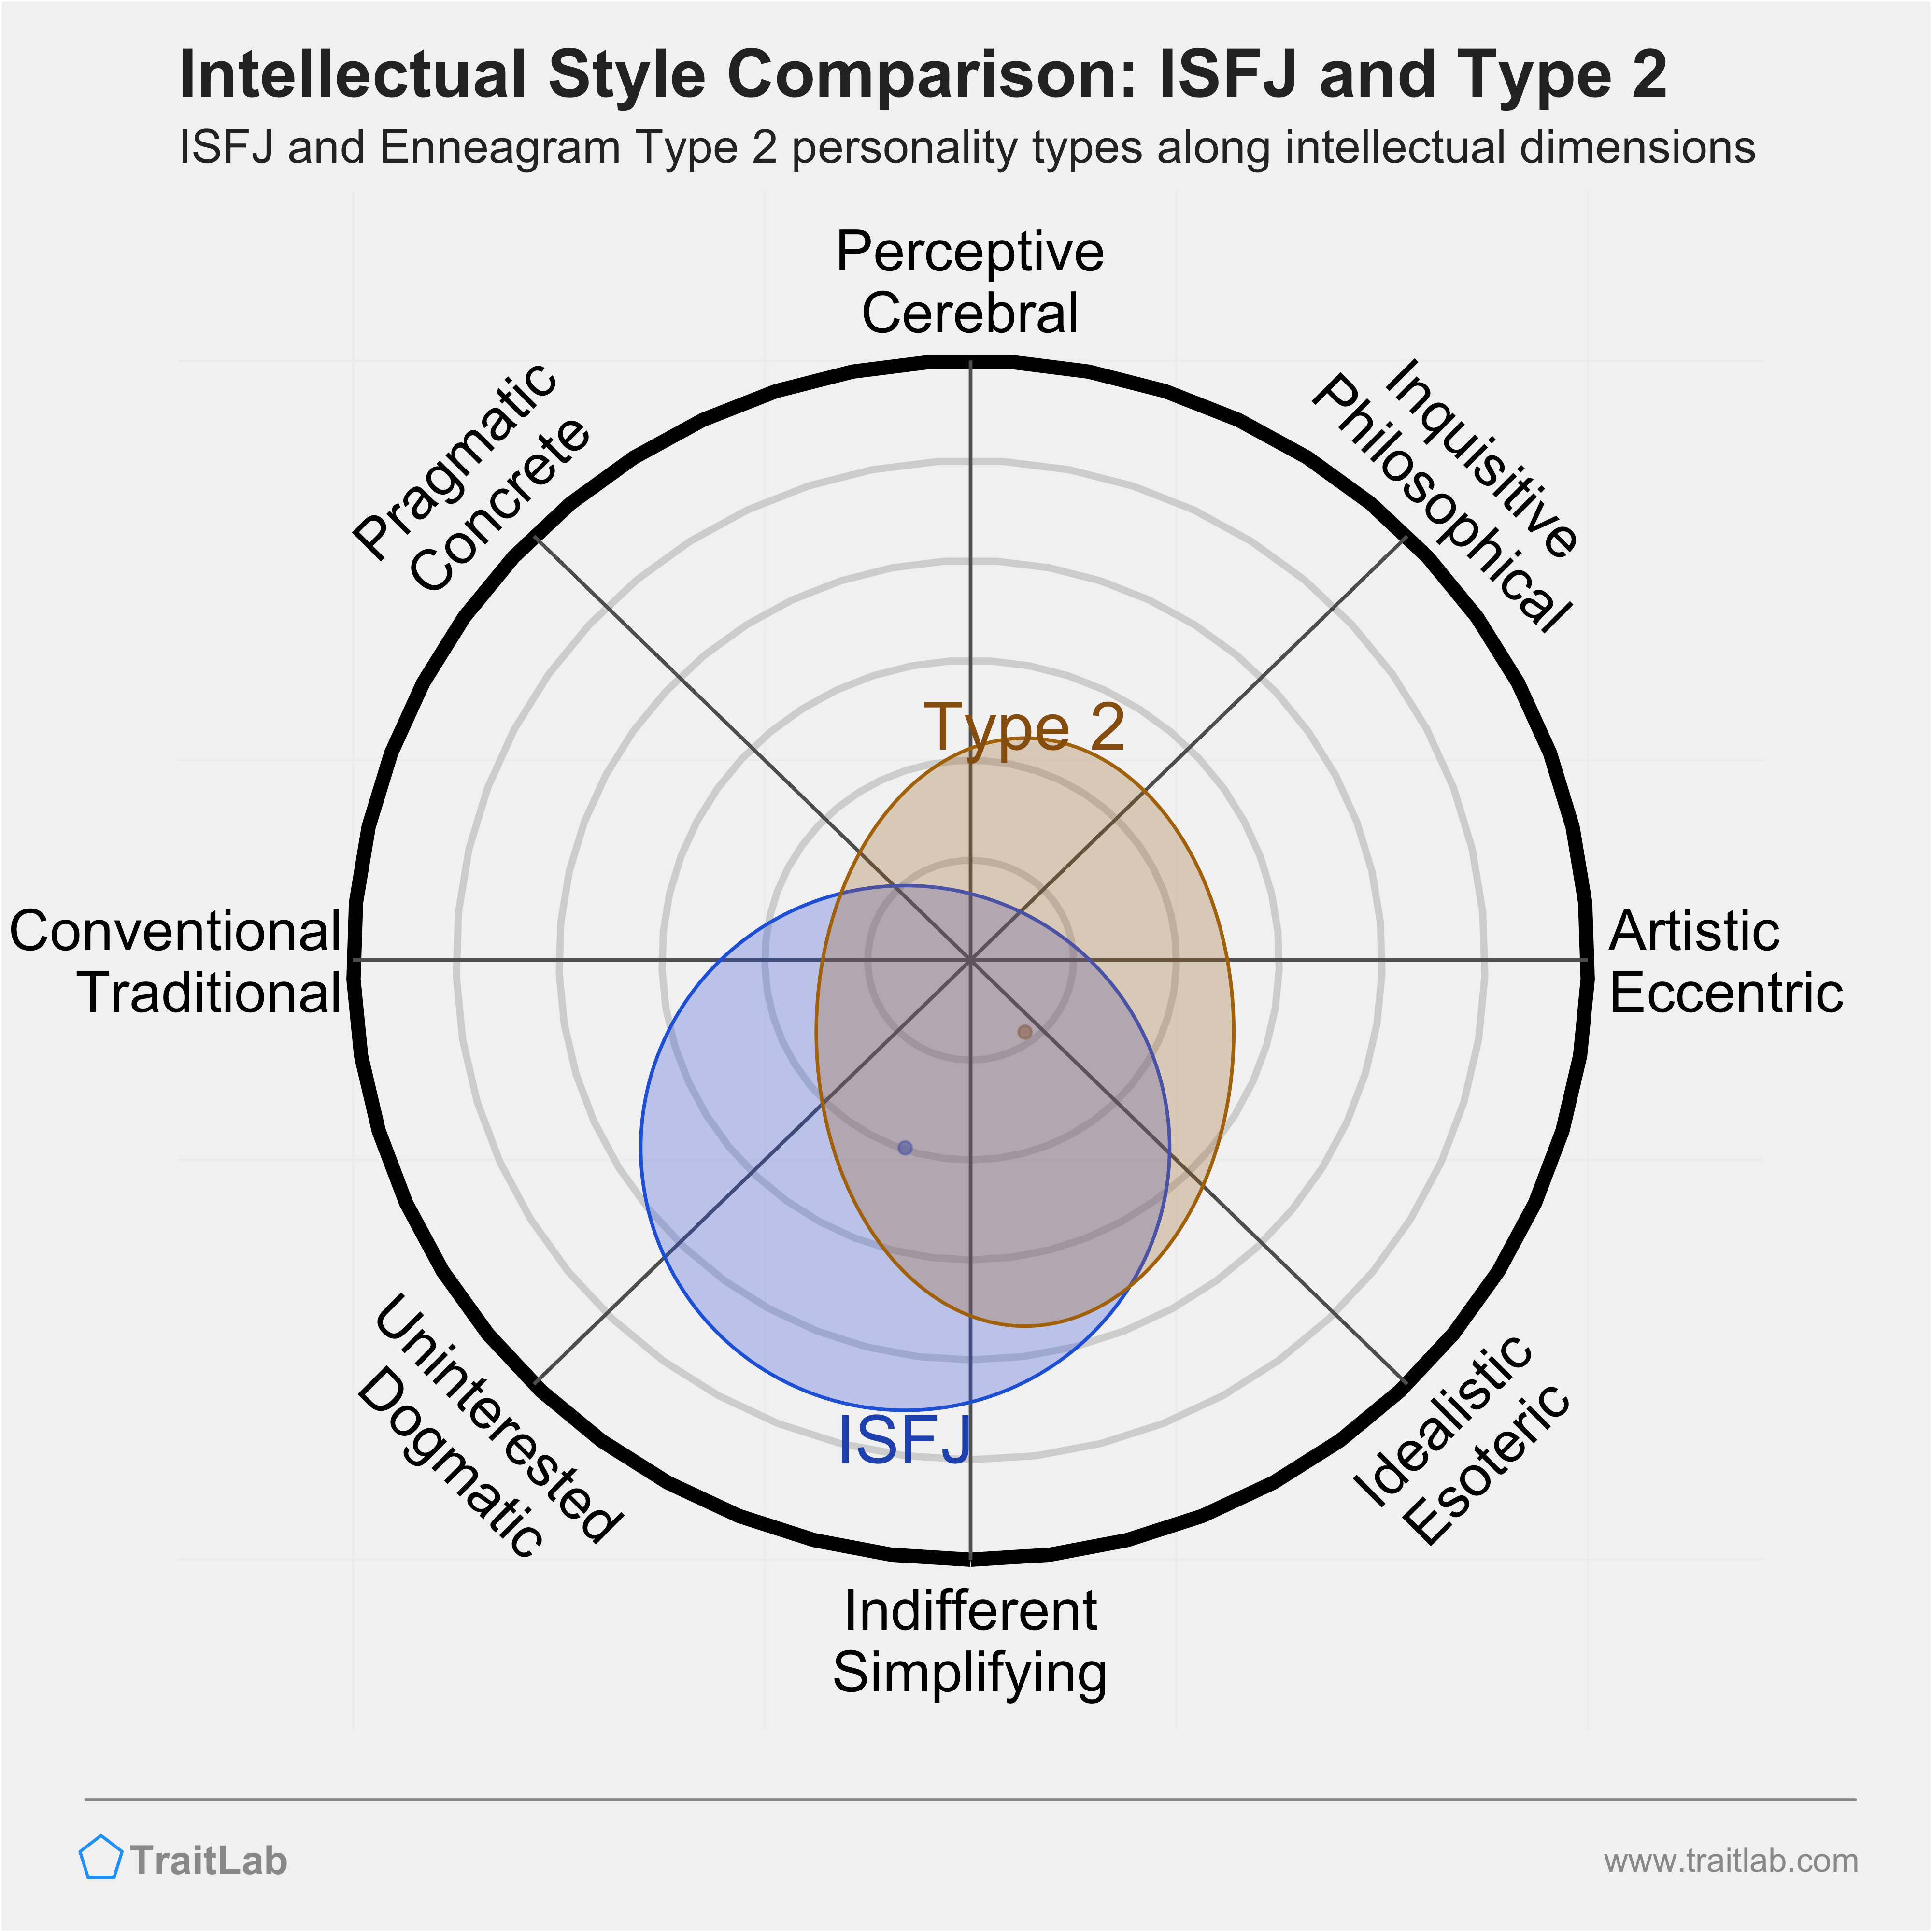 ISFJ and Type 2 comparison across intellectual dimensions